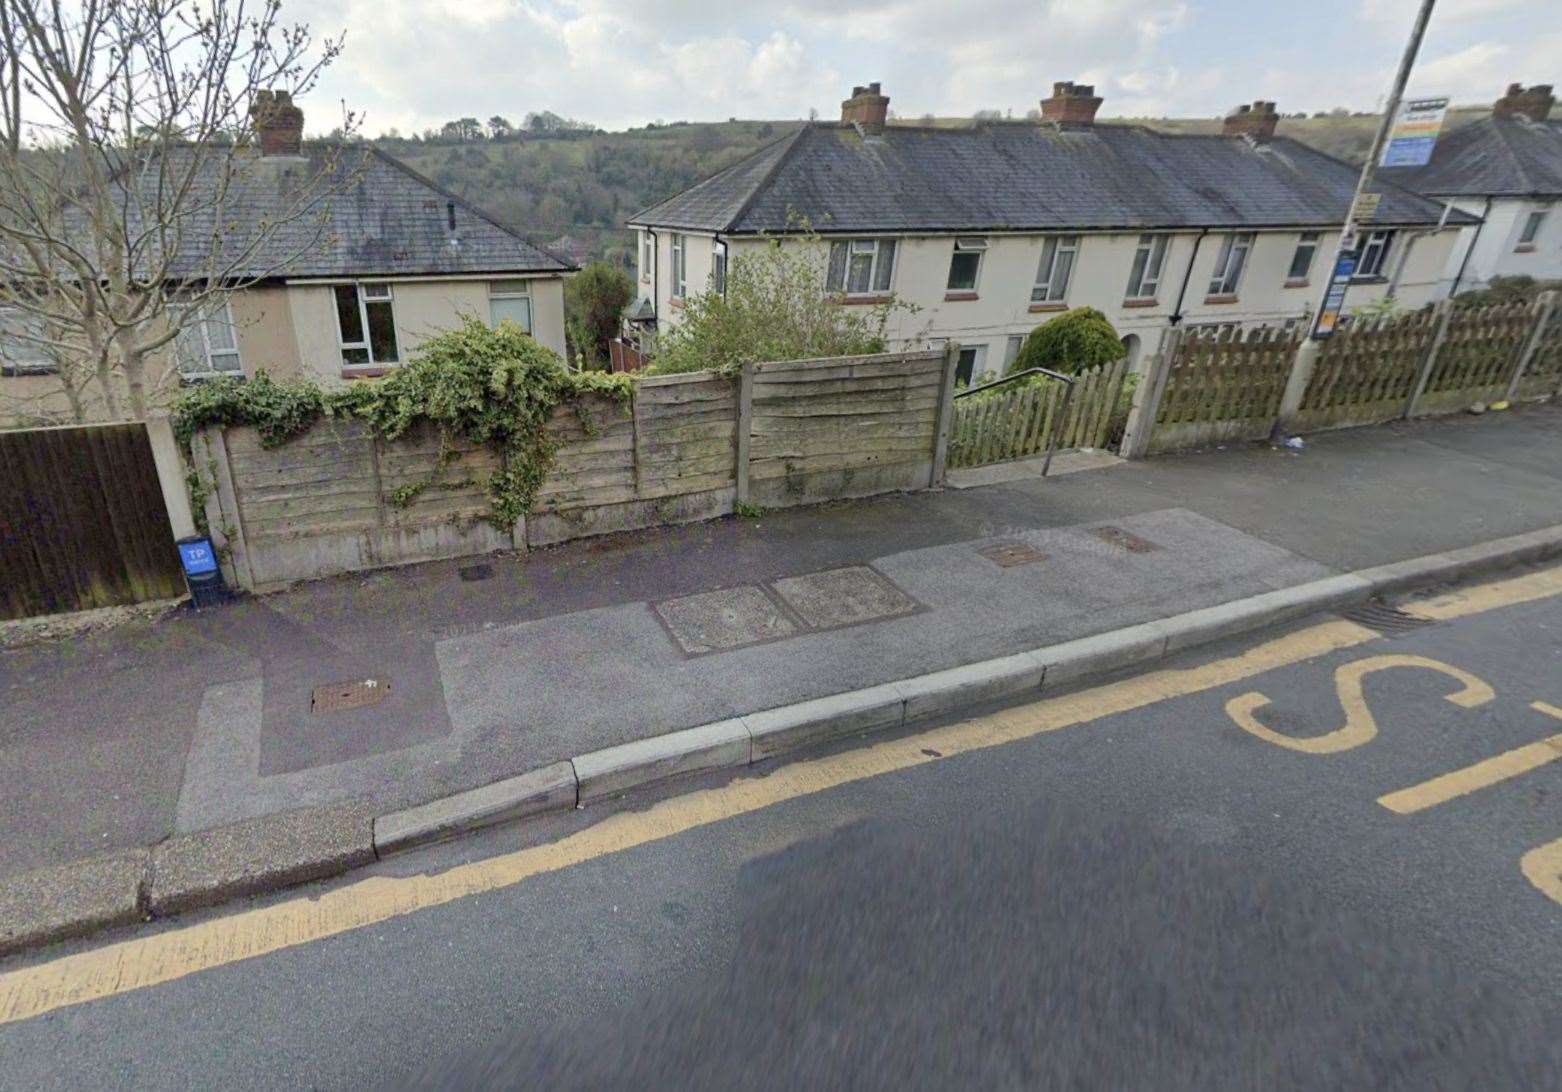 The alleged assault is said to have taken place in an alleyway between Radigunds Road and Beaufoy Road in Dover. Google Maps